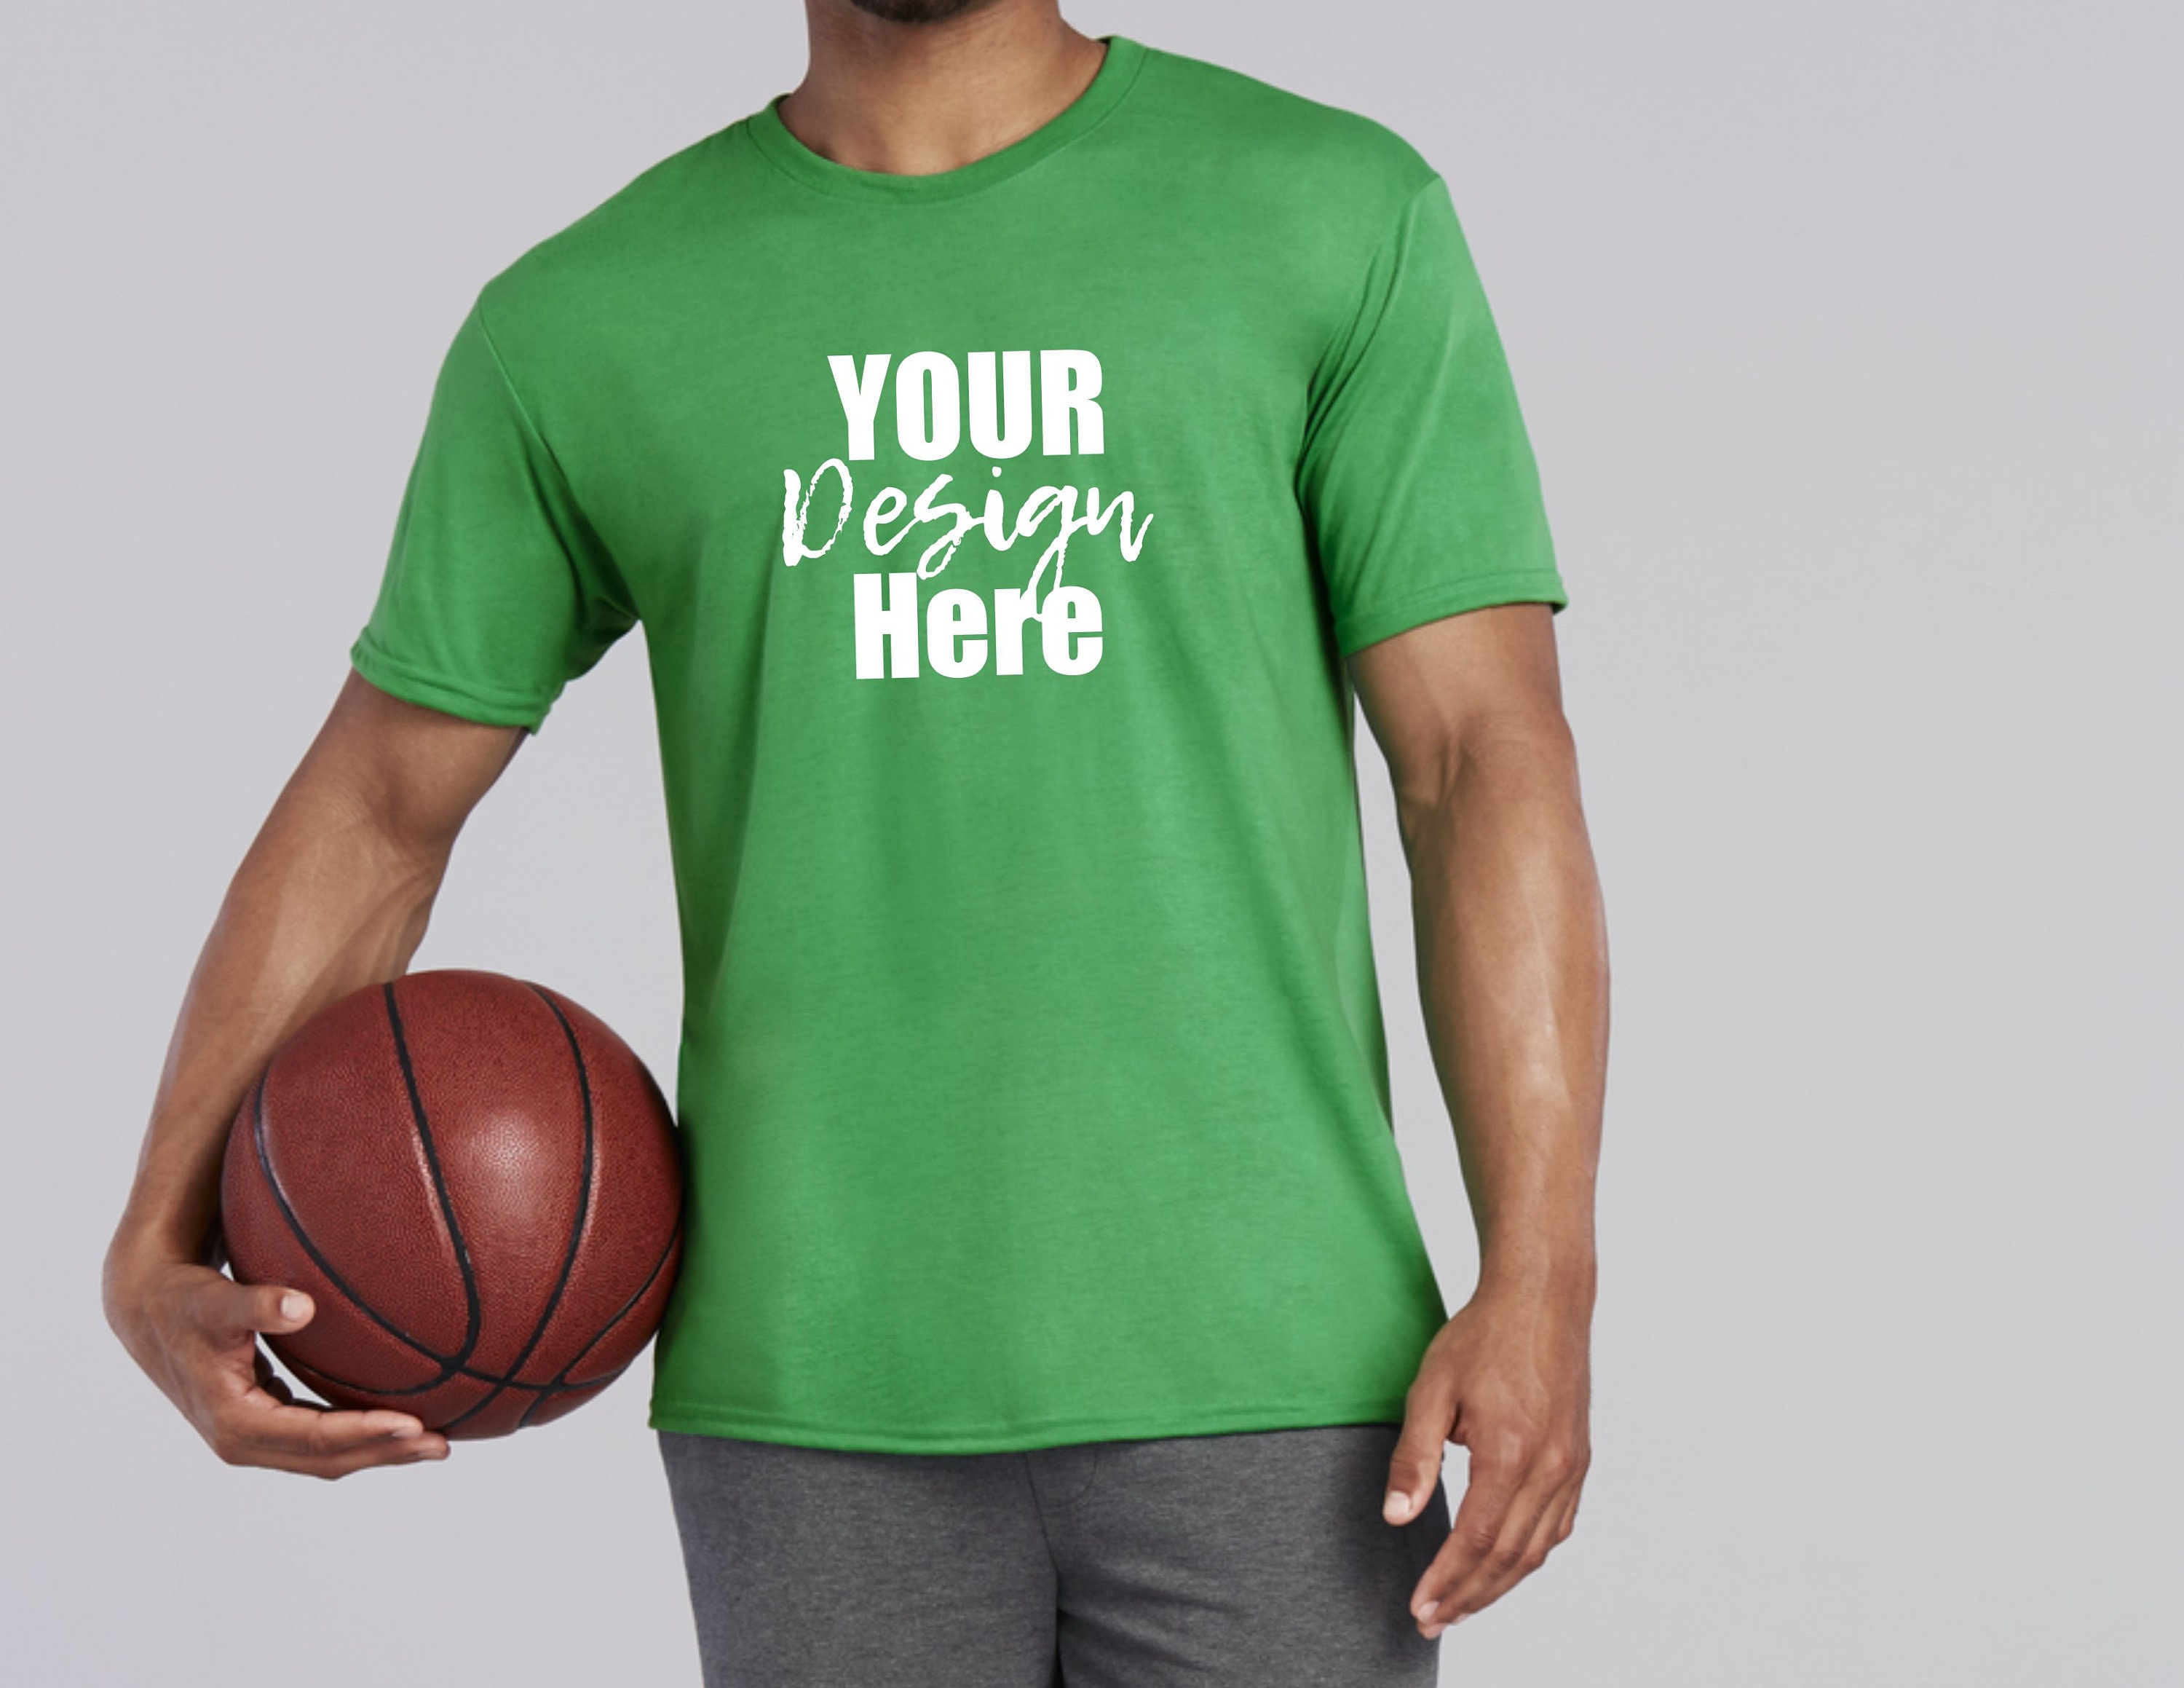  Custom Basketball Performance Shirt, Personalized Basketball  Warm Up Dri Fit T-Shirt, Add Your Team Name, Youth & Adult Sizes Available  (PURPLE) : Handmade Products